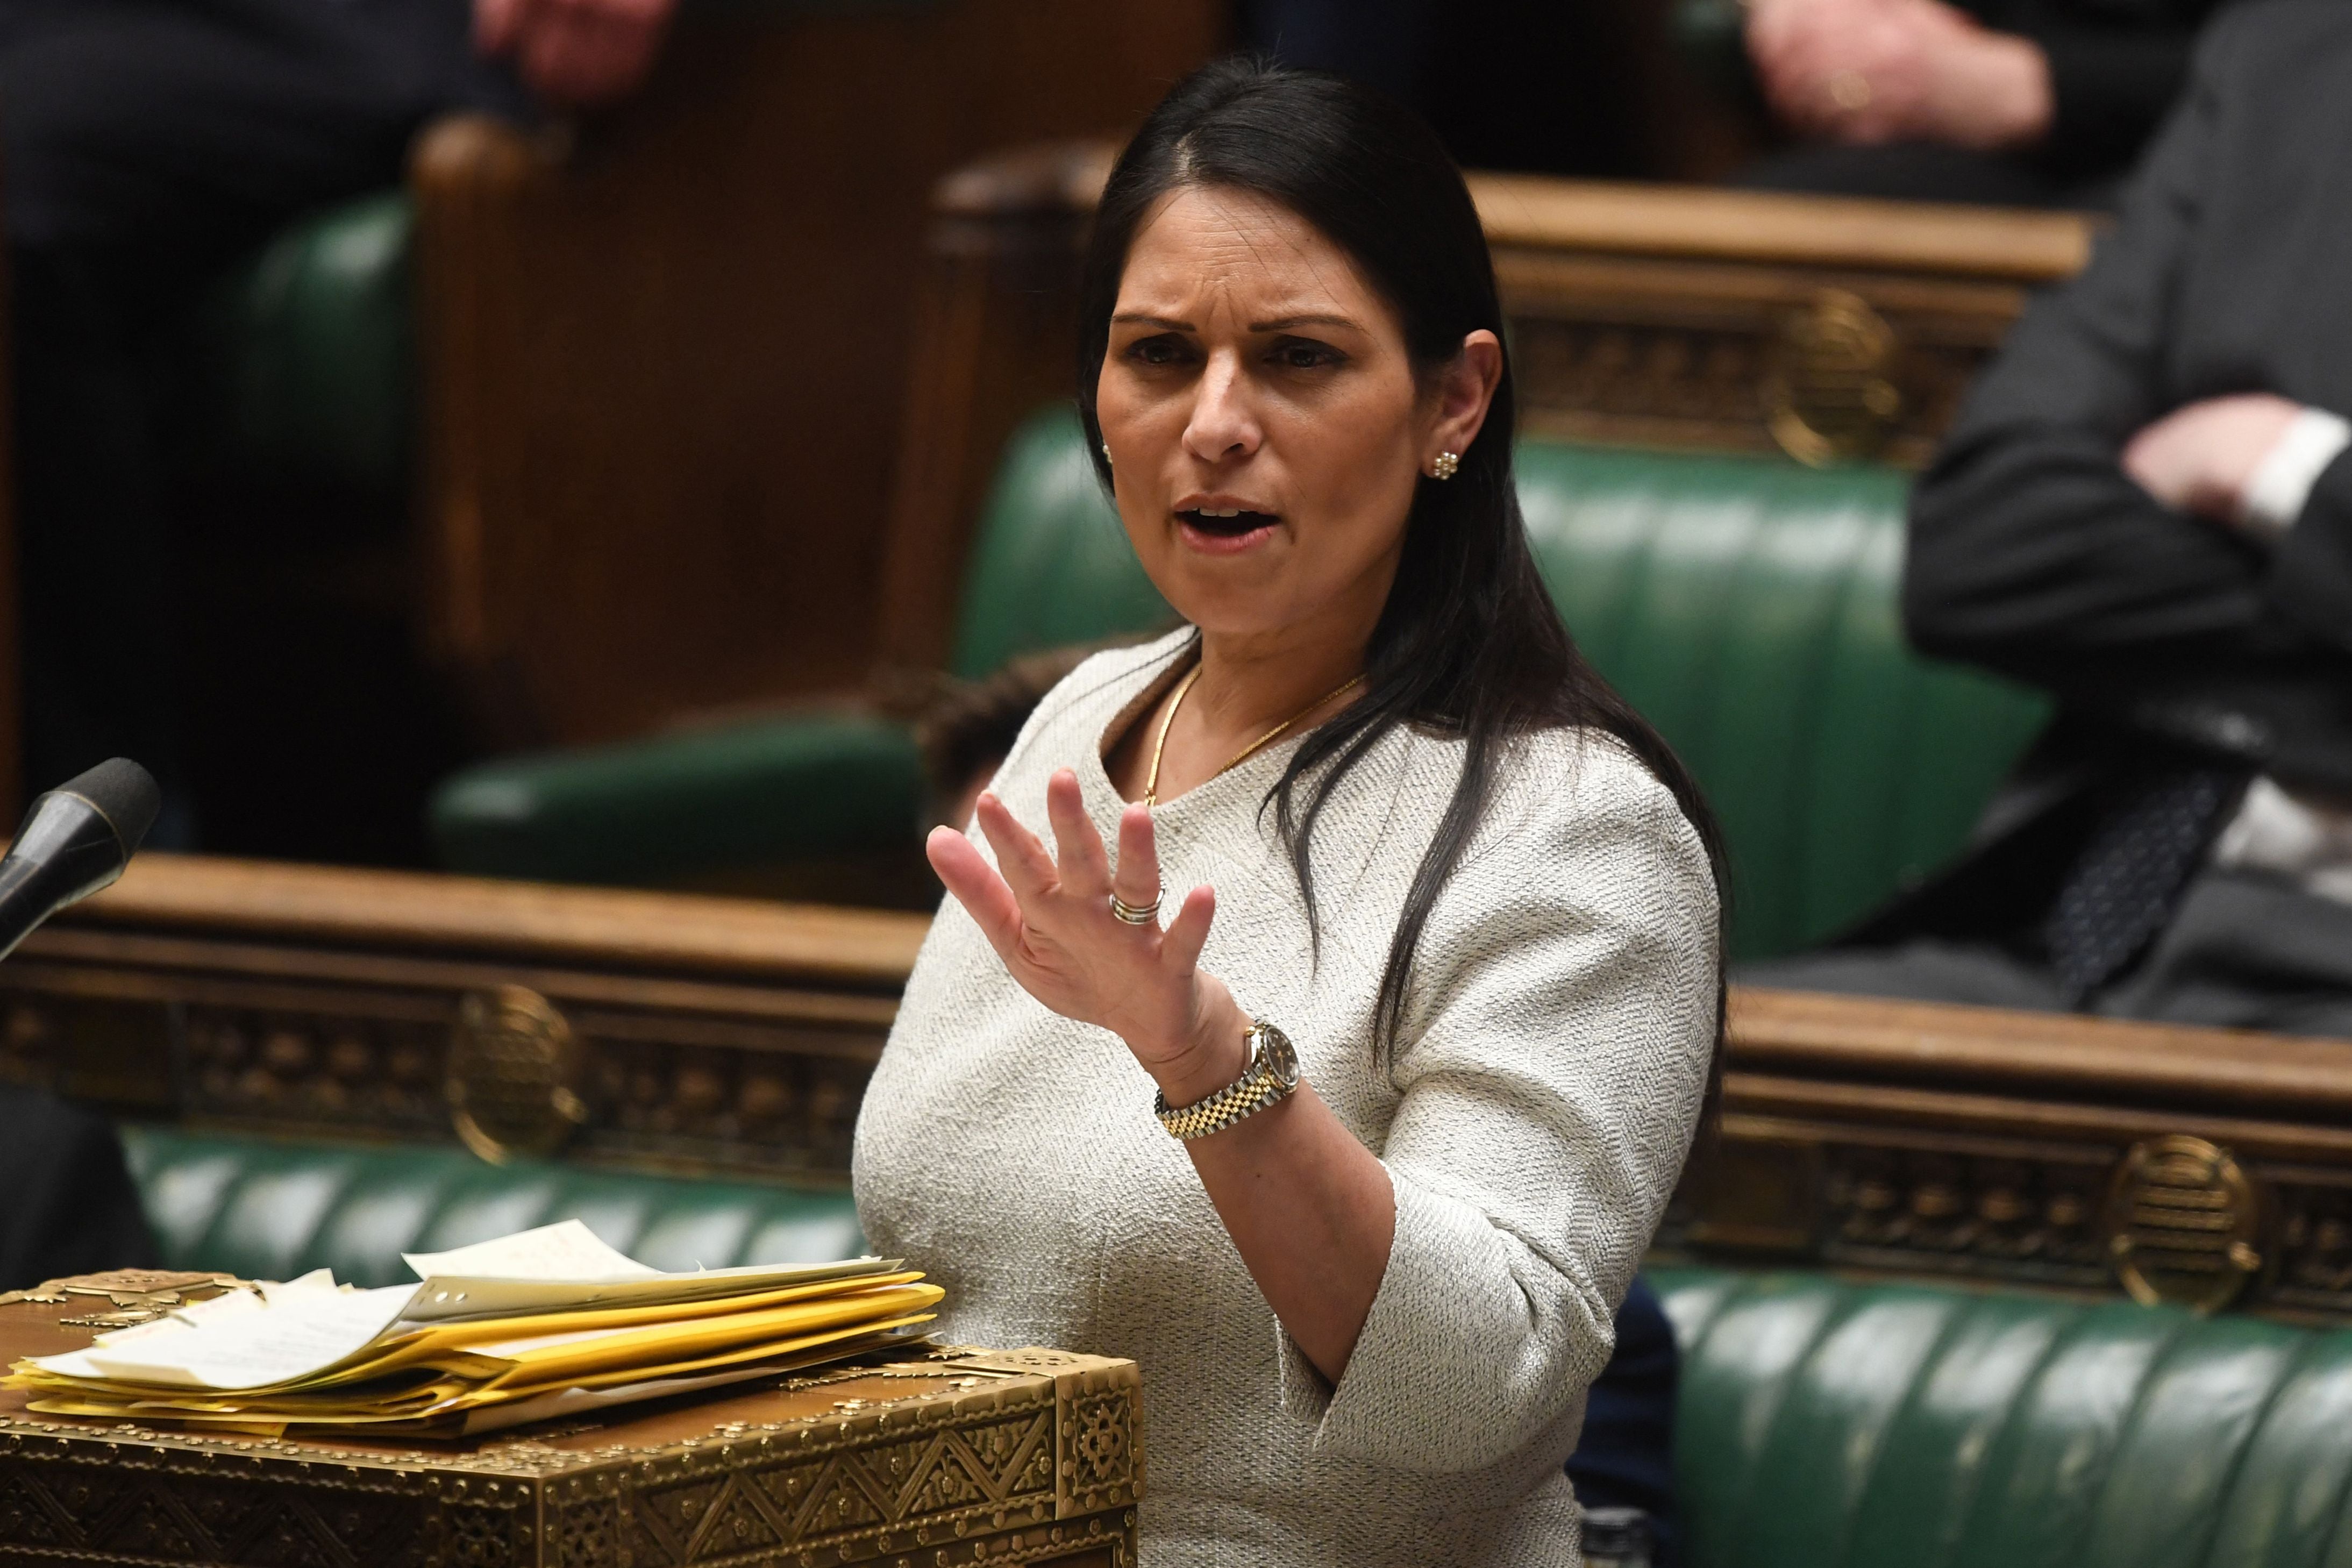 The home secretary, Priti Patel, in the House of Commons